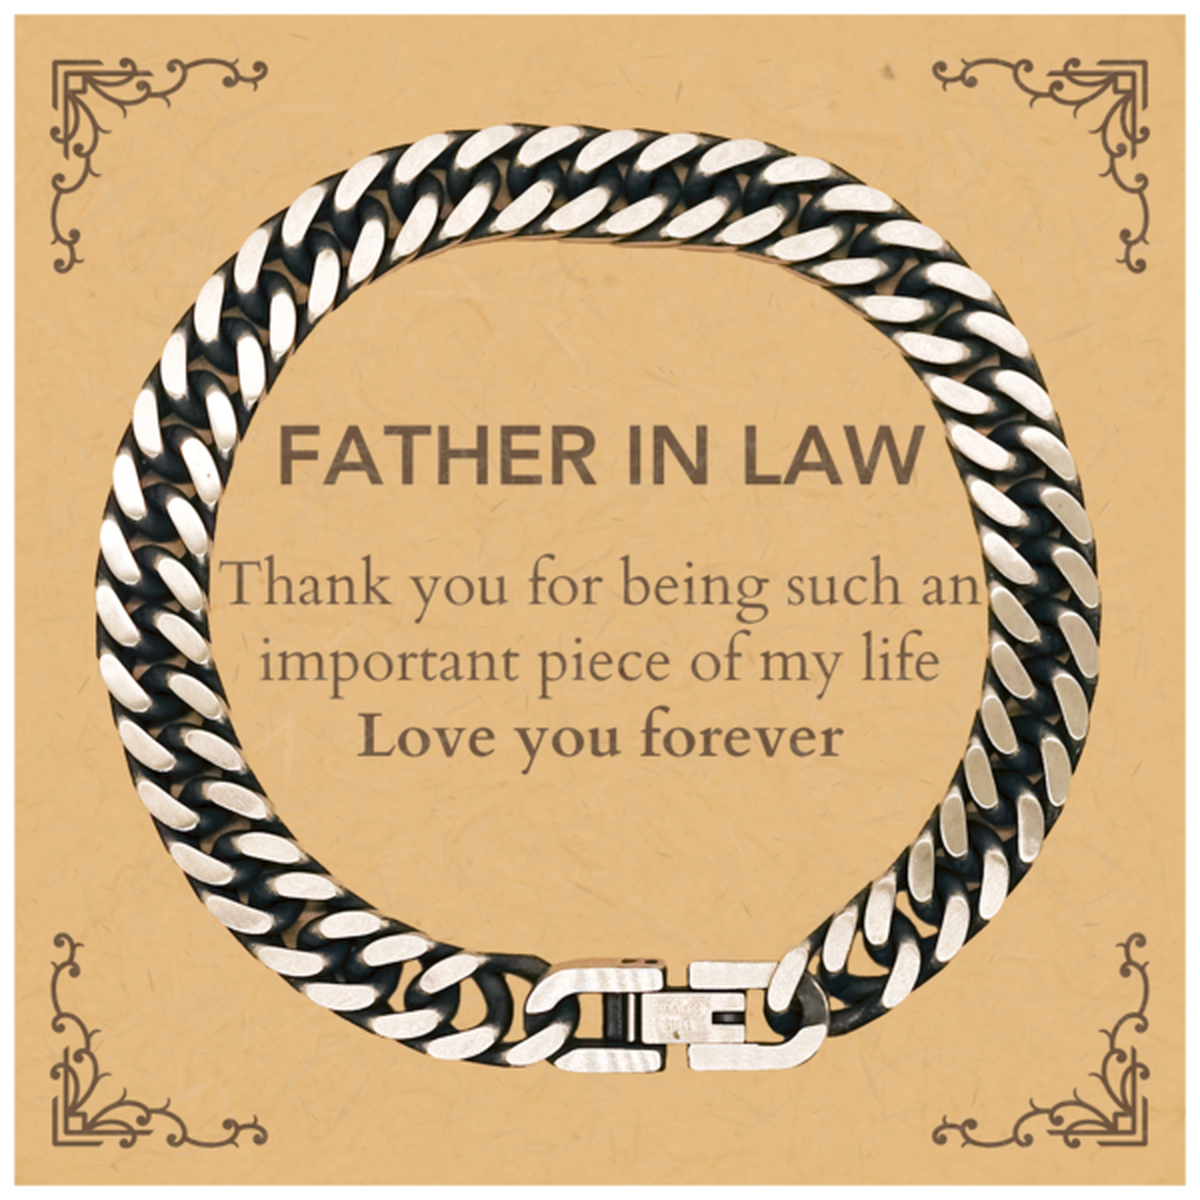 Appropriate Father In Law Cuban Link Chain Bracelet Epic Birthday Gifts for Father In Law Thank you for being such an important piece of my life Father In Law Christmas Mothers Fathers Day